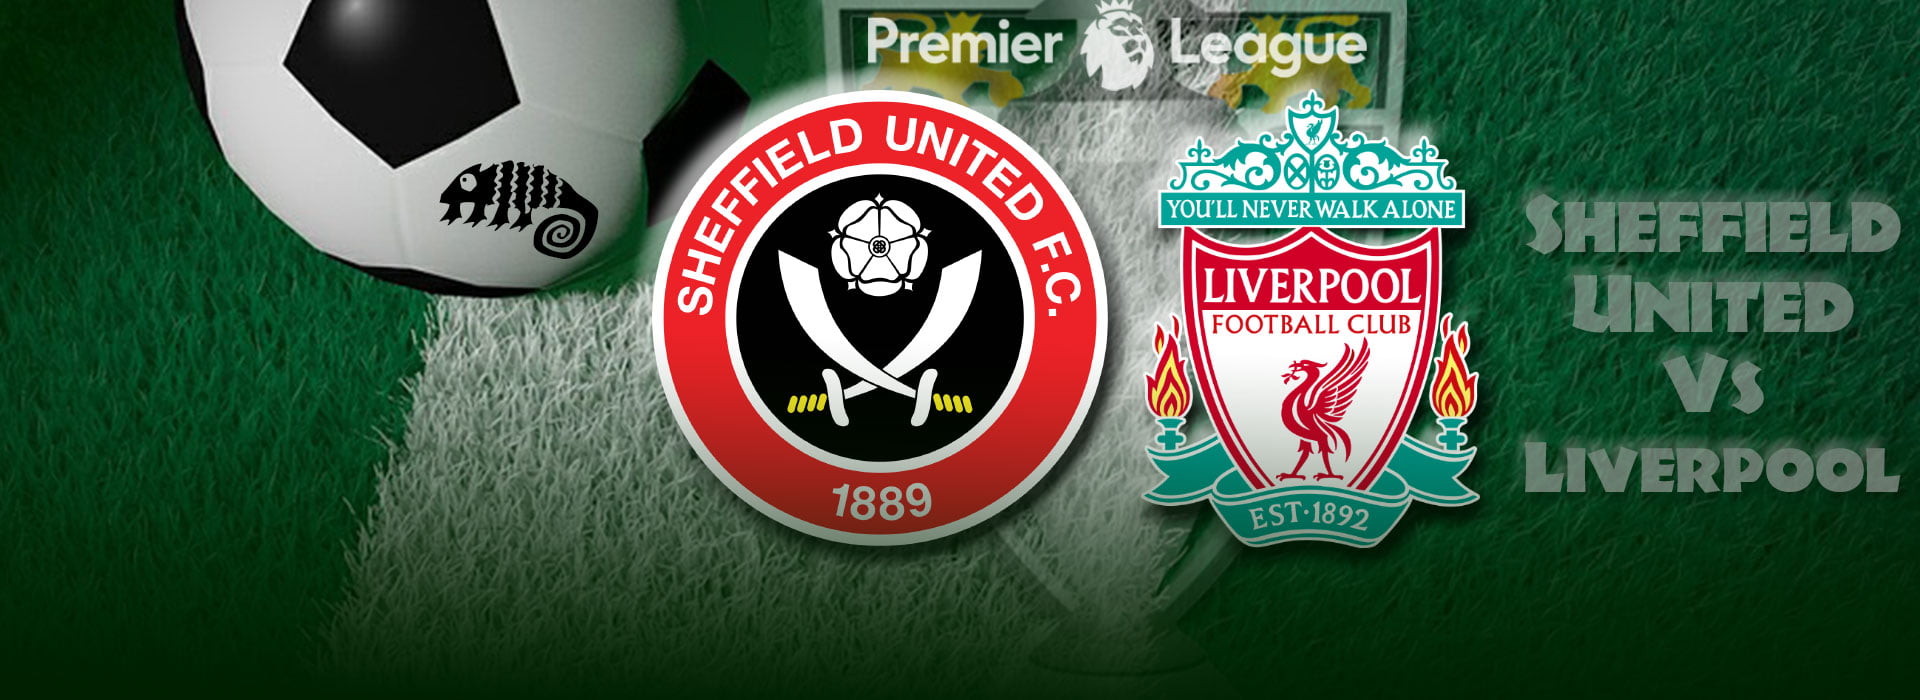 Sheffield United vs Liverpool Match Predictions & Betting Tips